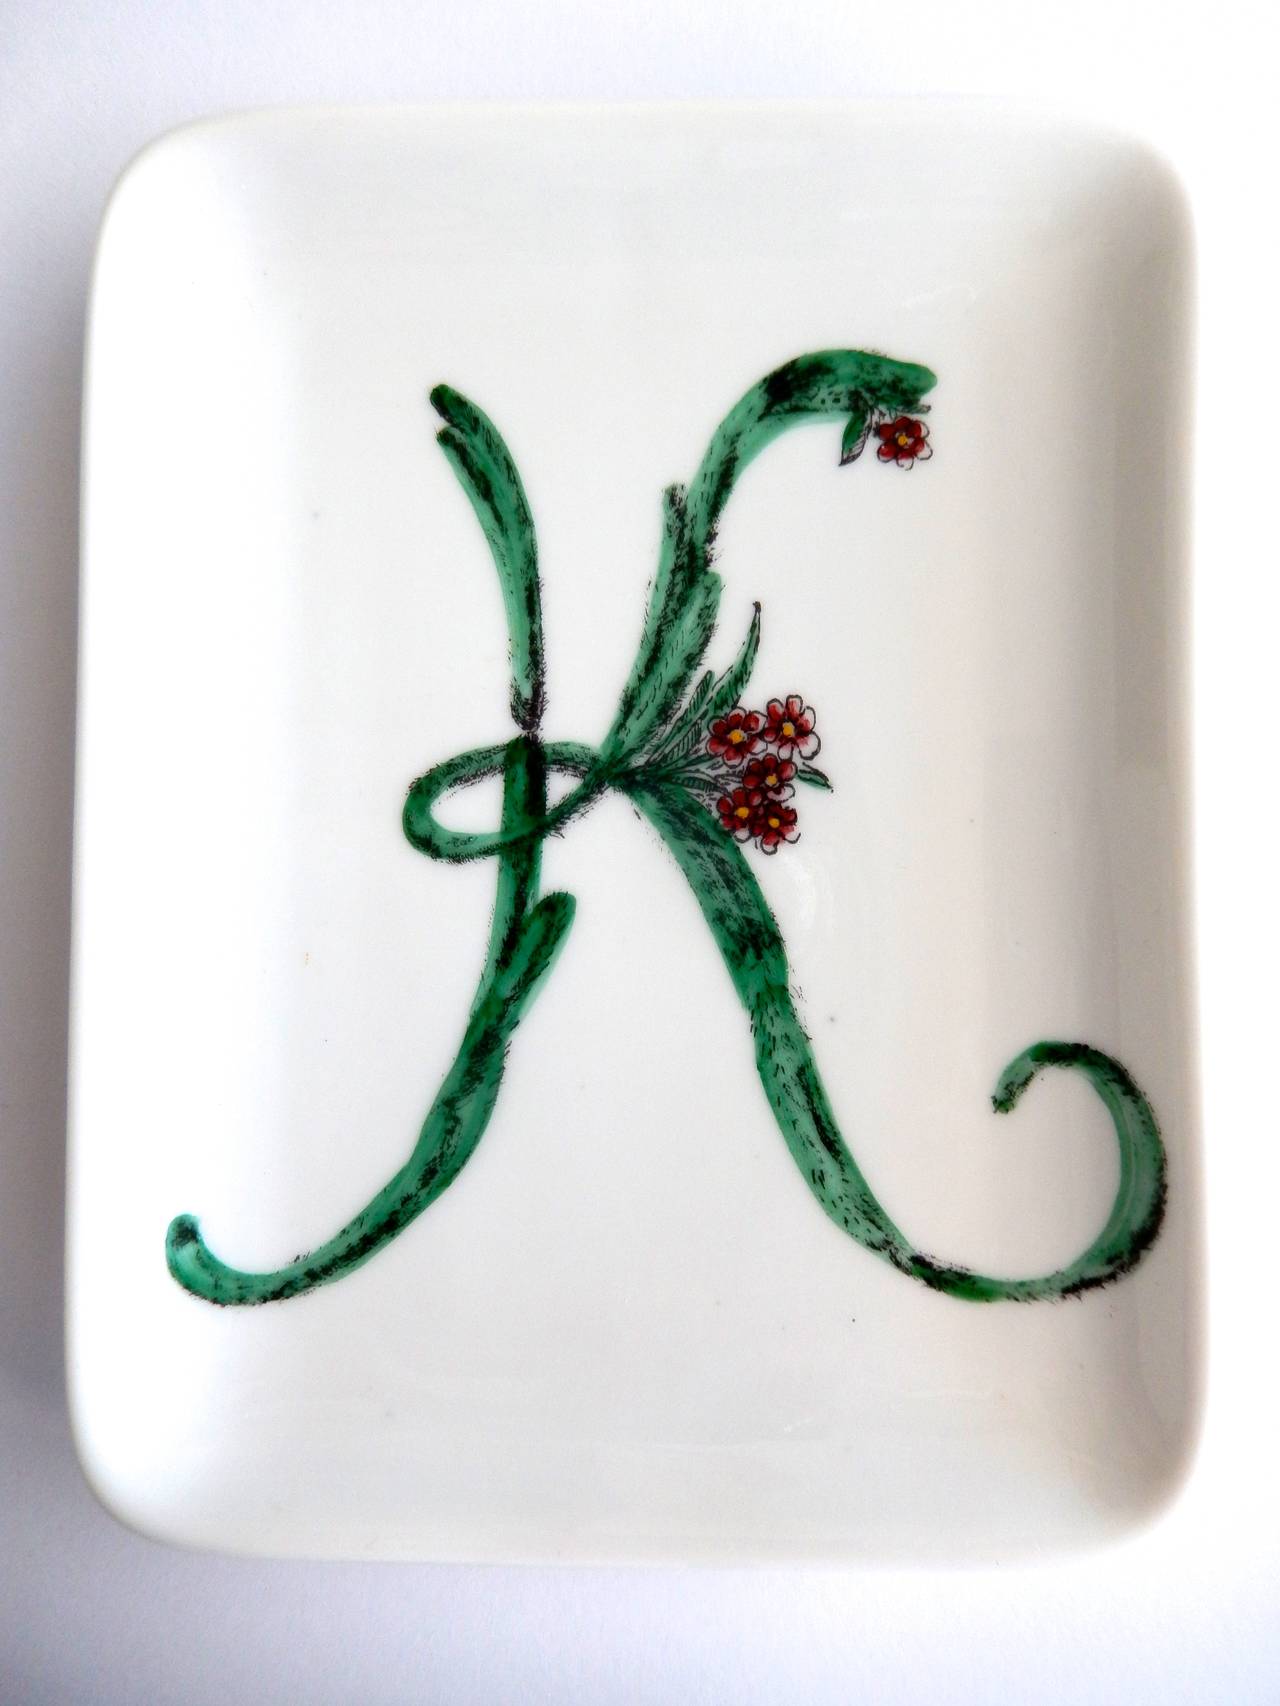 An unusual ceramic dish or pin tray by Fornasetti with a stylized cactus flower design forming the letter 